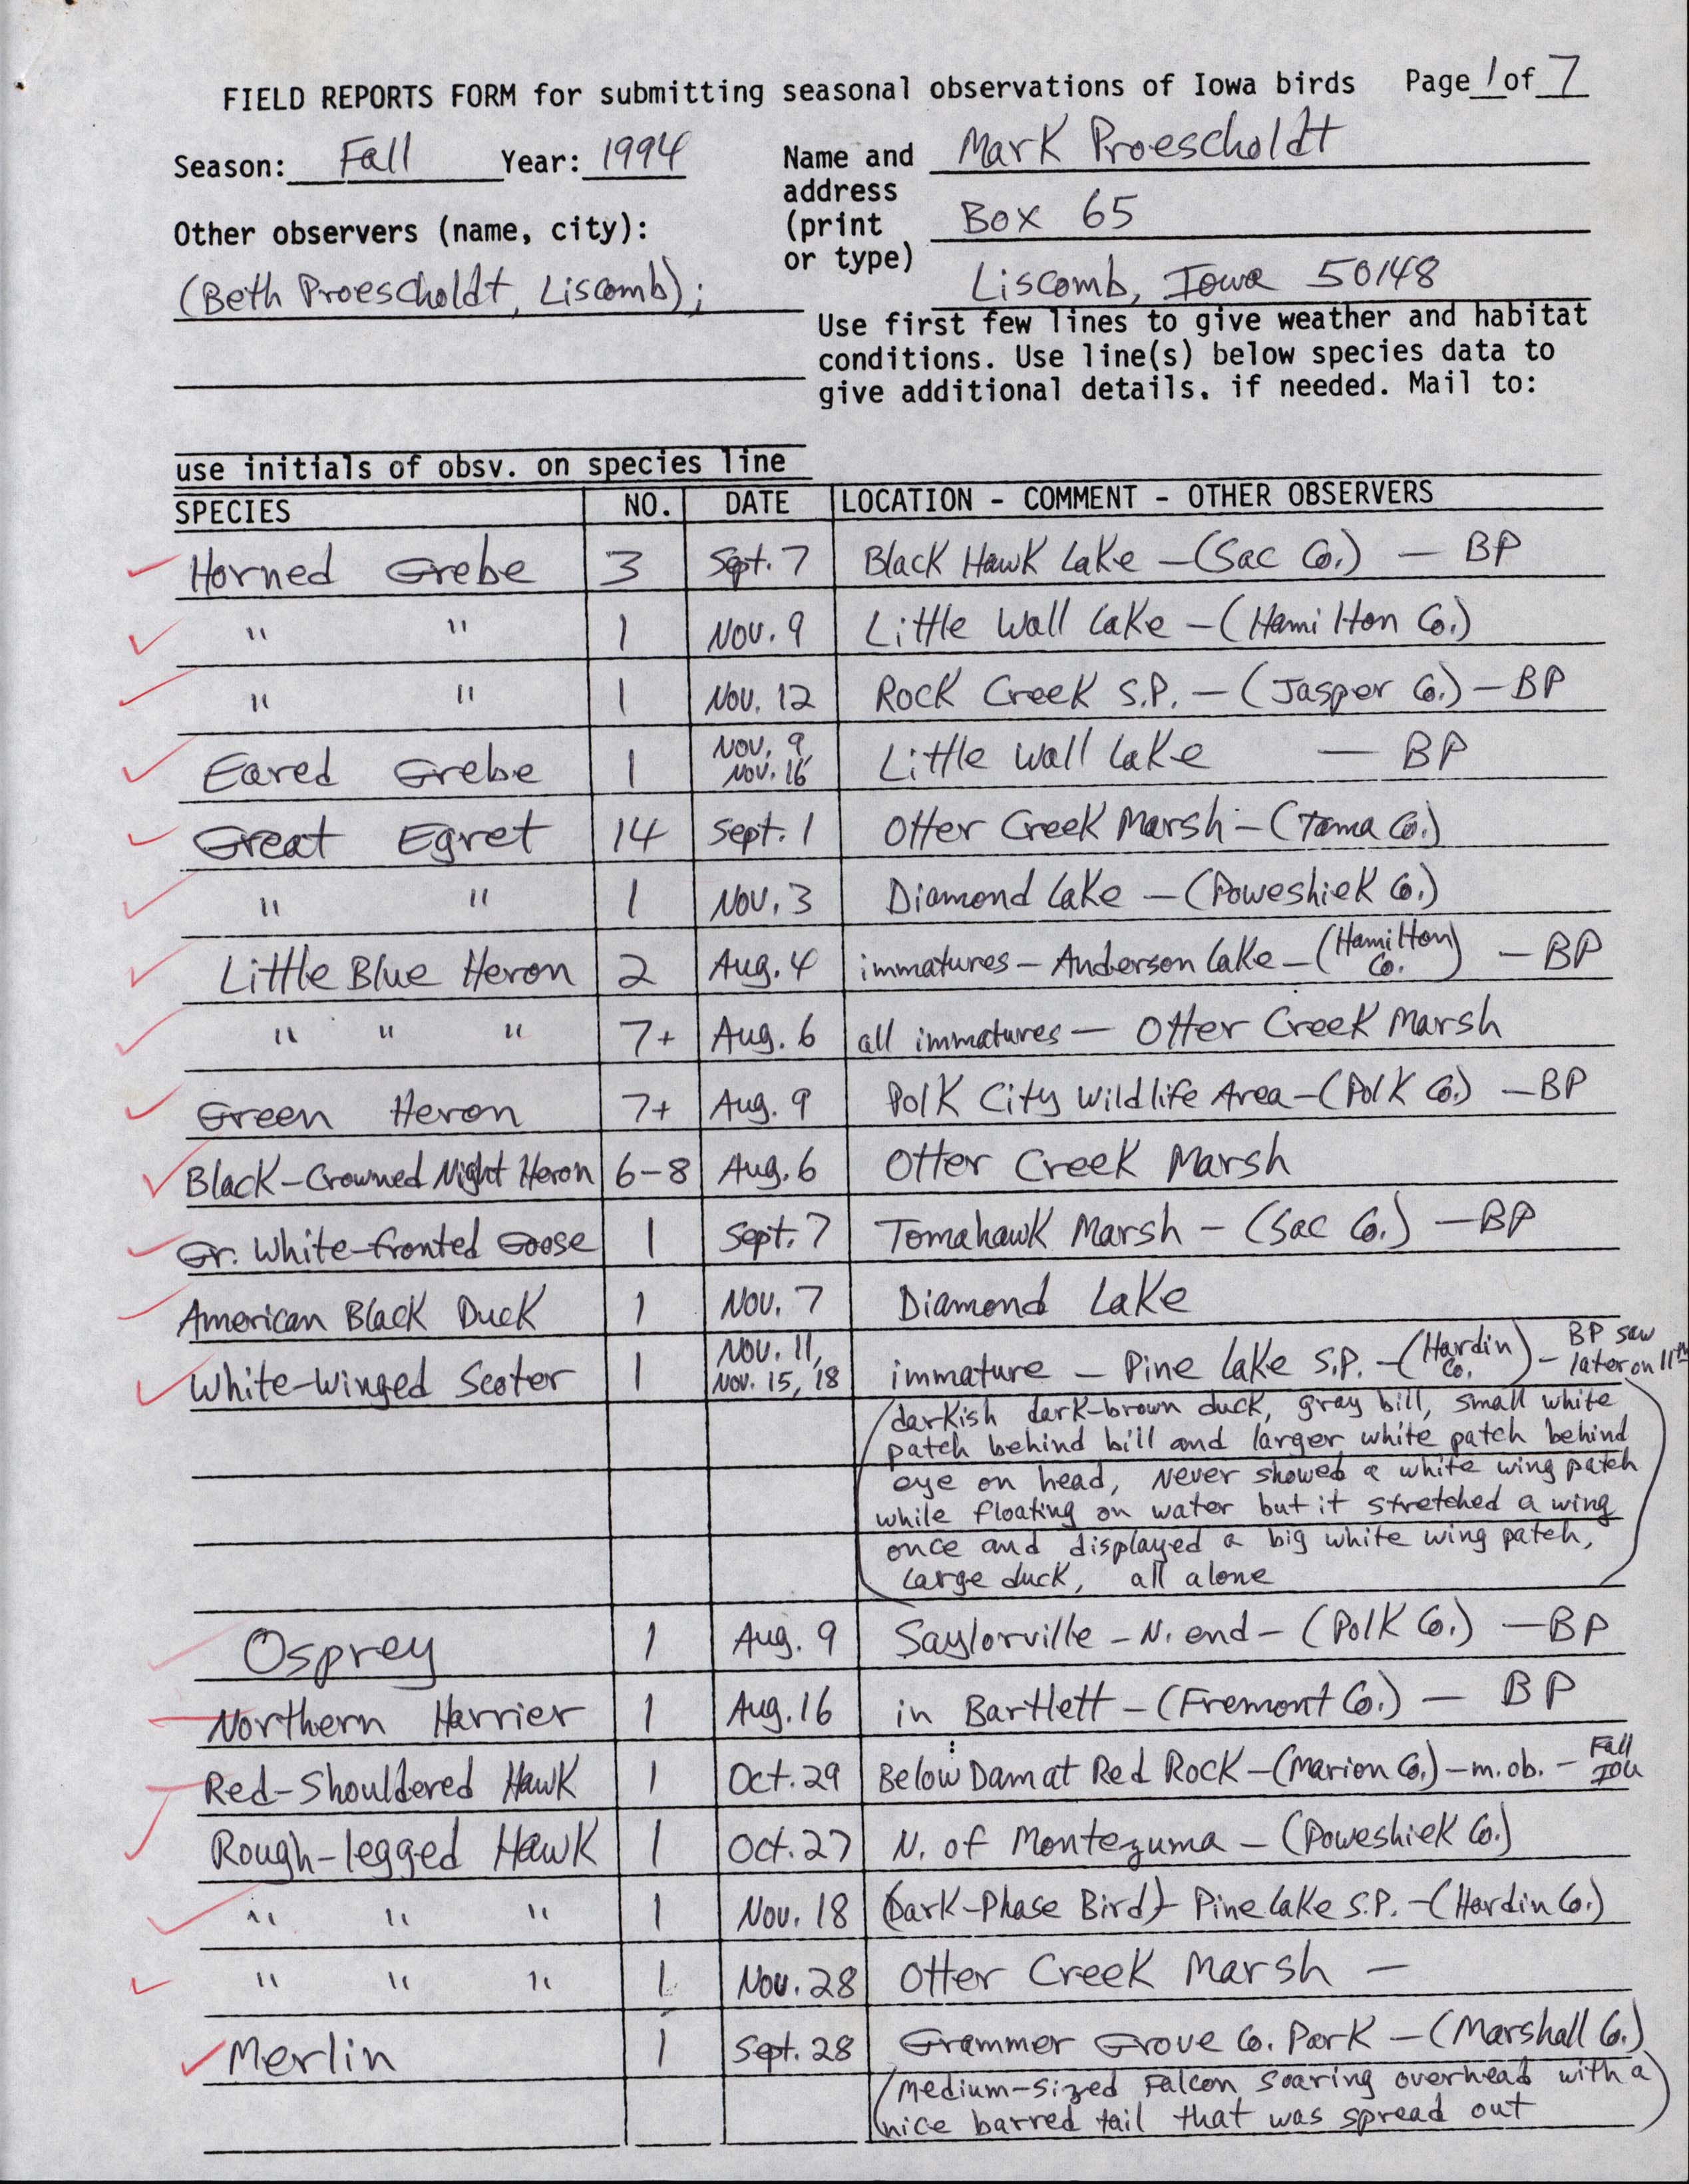 Field reports form for submitting seasonal observations of Iowa birds, Mark Proescholdt, fall 1994